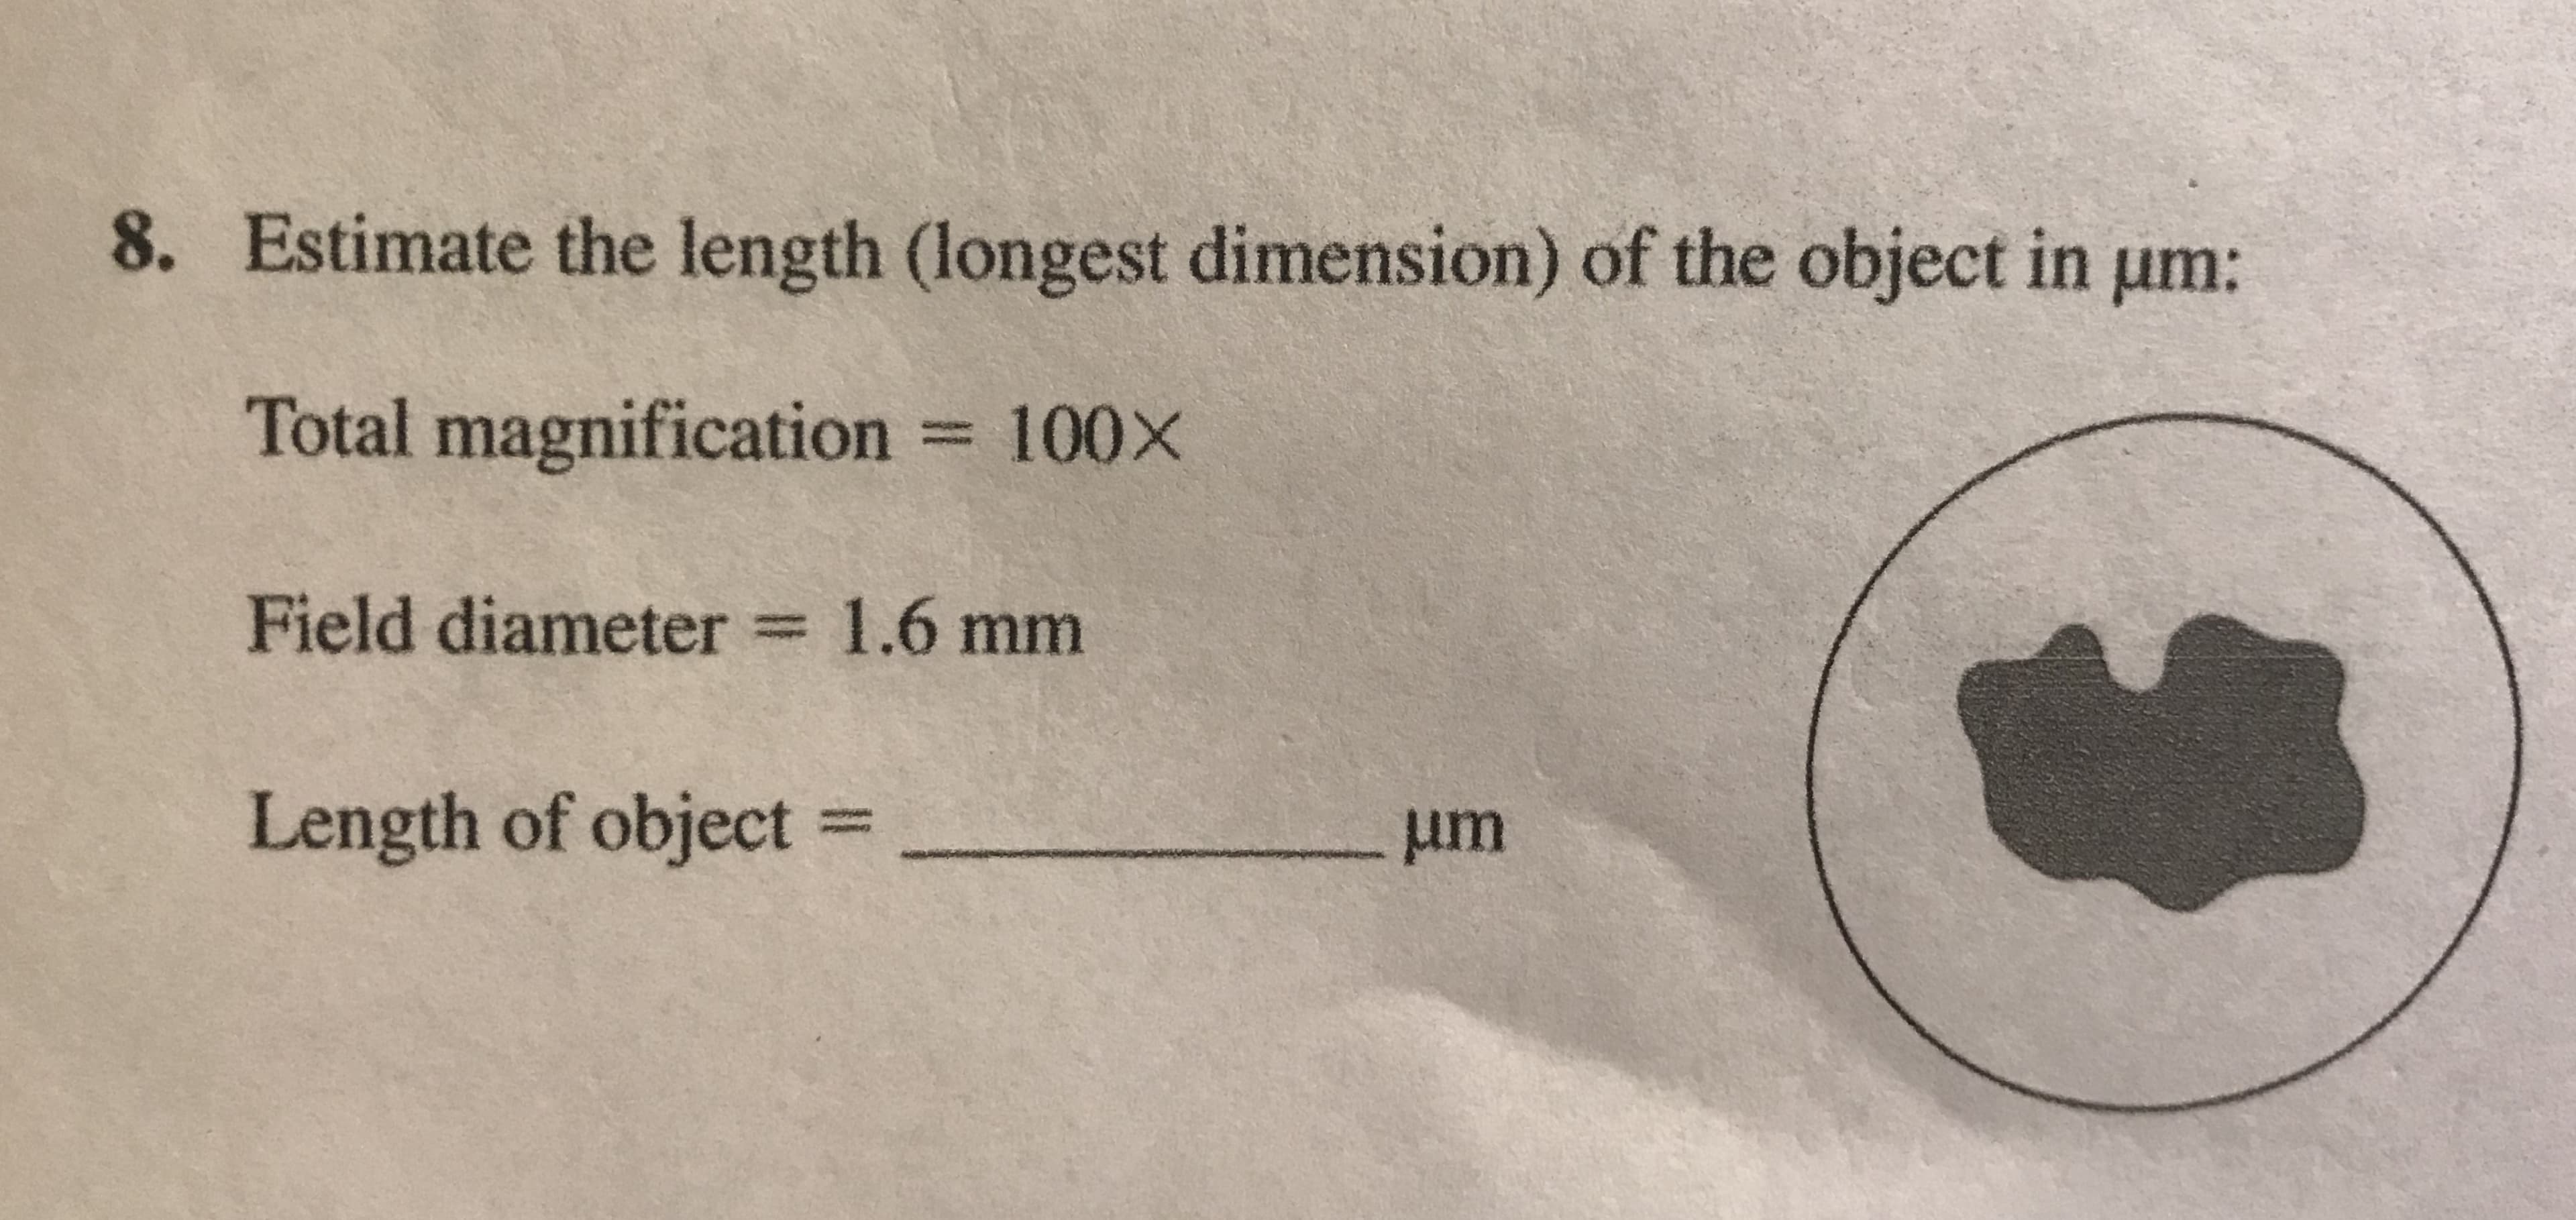 8. Estimate the length (longest dimension) of the object in um:
Total magnification 100X
Field diameter
1.6 mm
Length of object =
um
